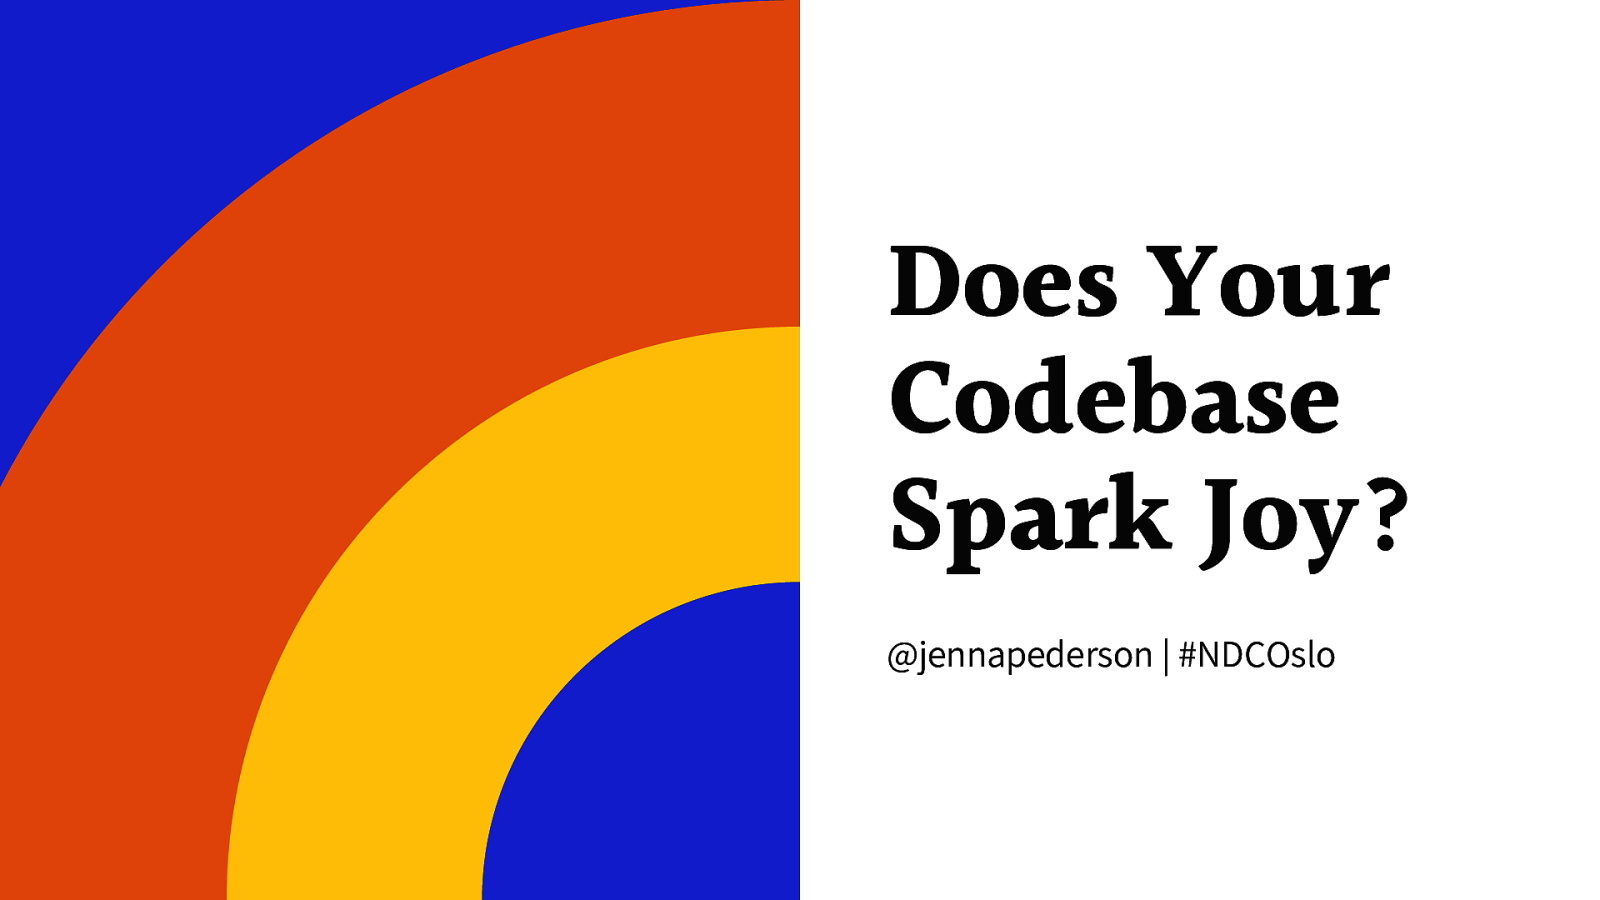 Does Your Codebase Spark Joy?